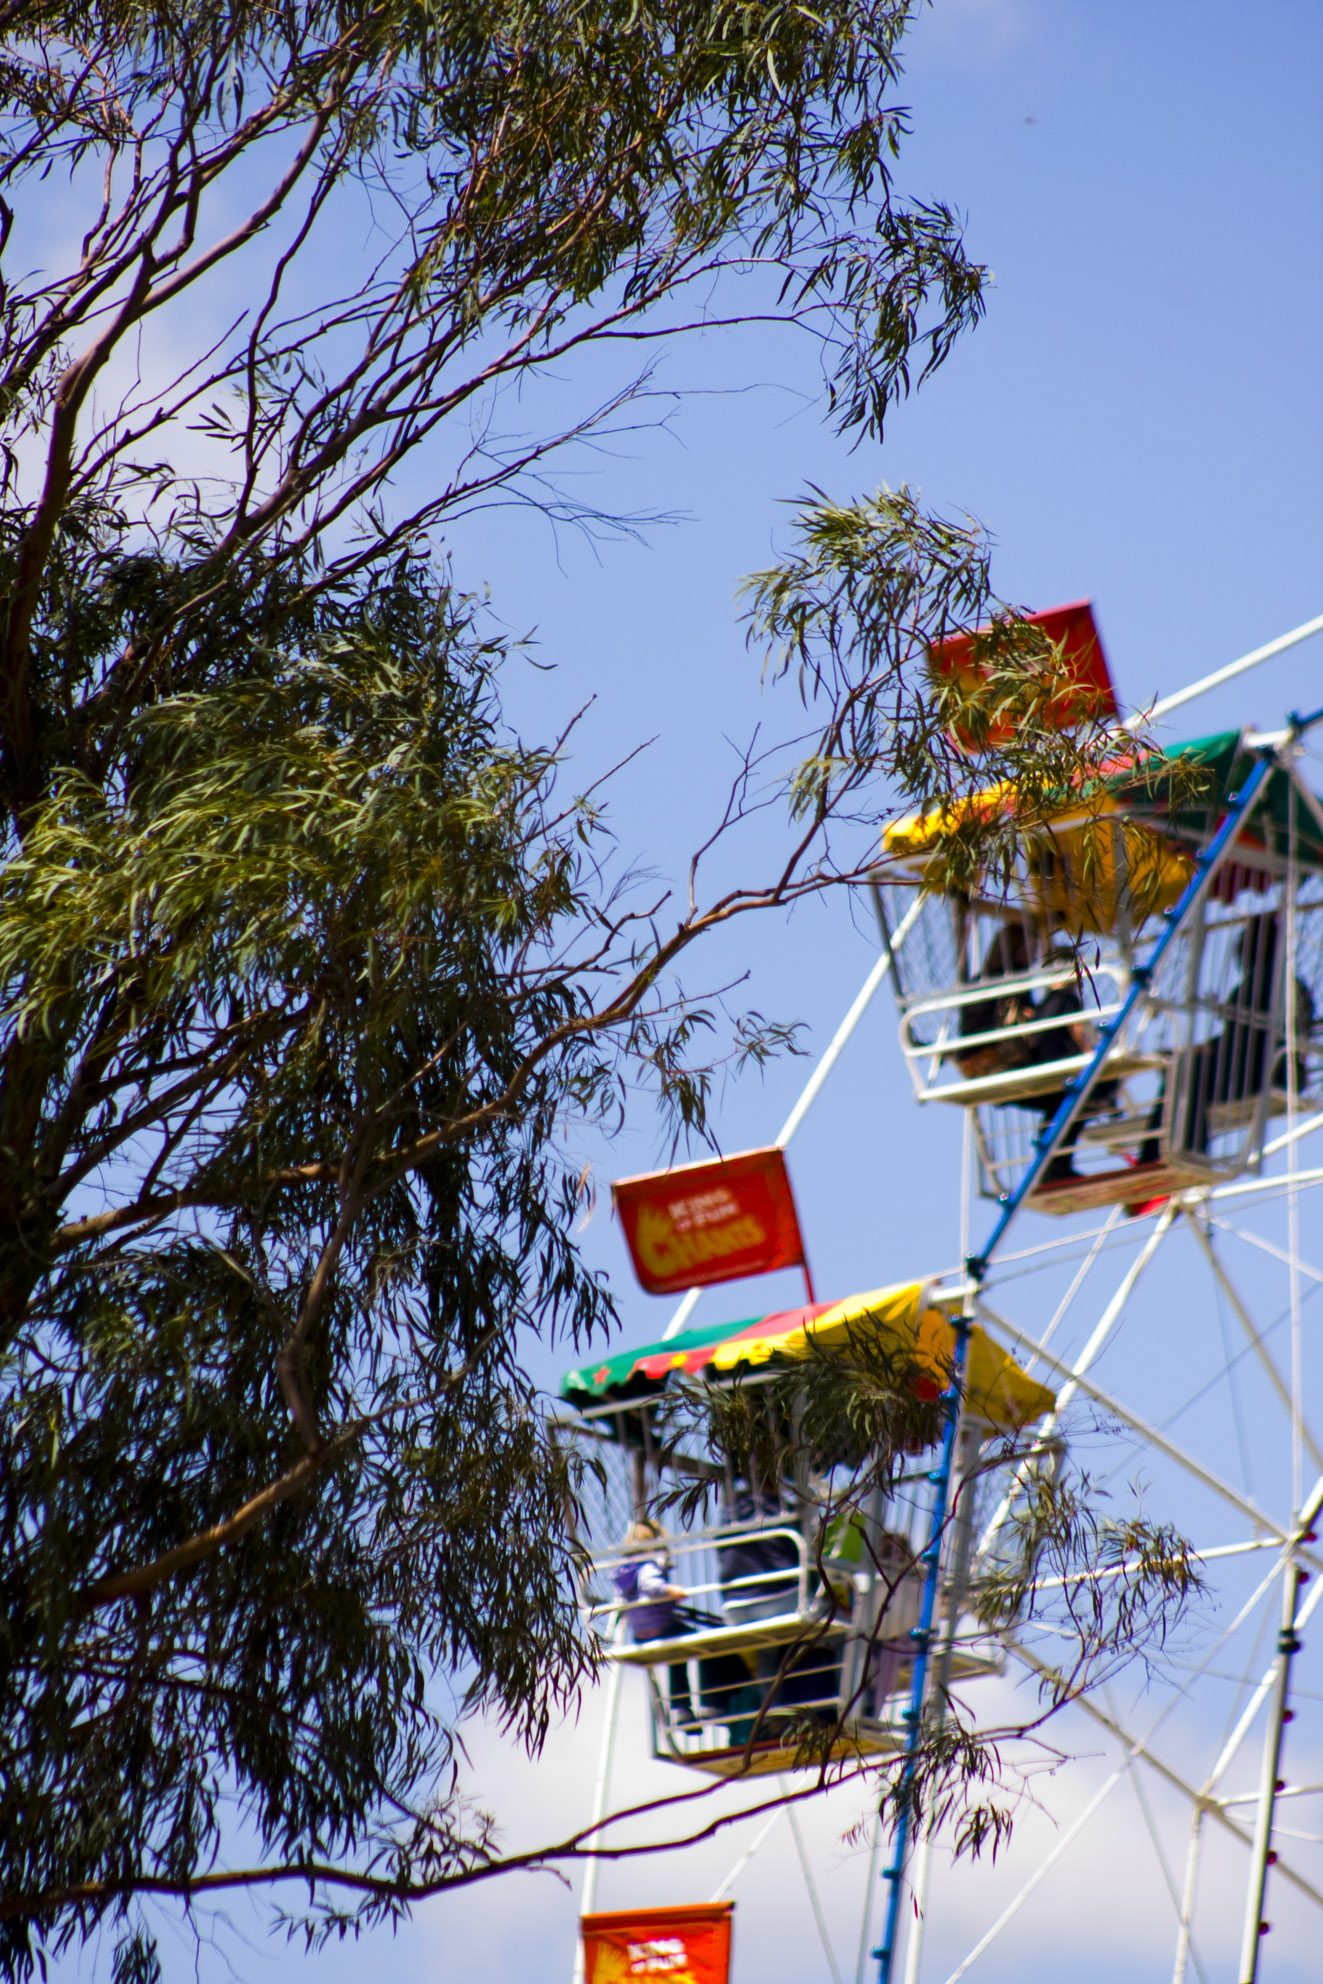 a ferris wheel with four seats next to a tree